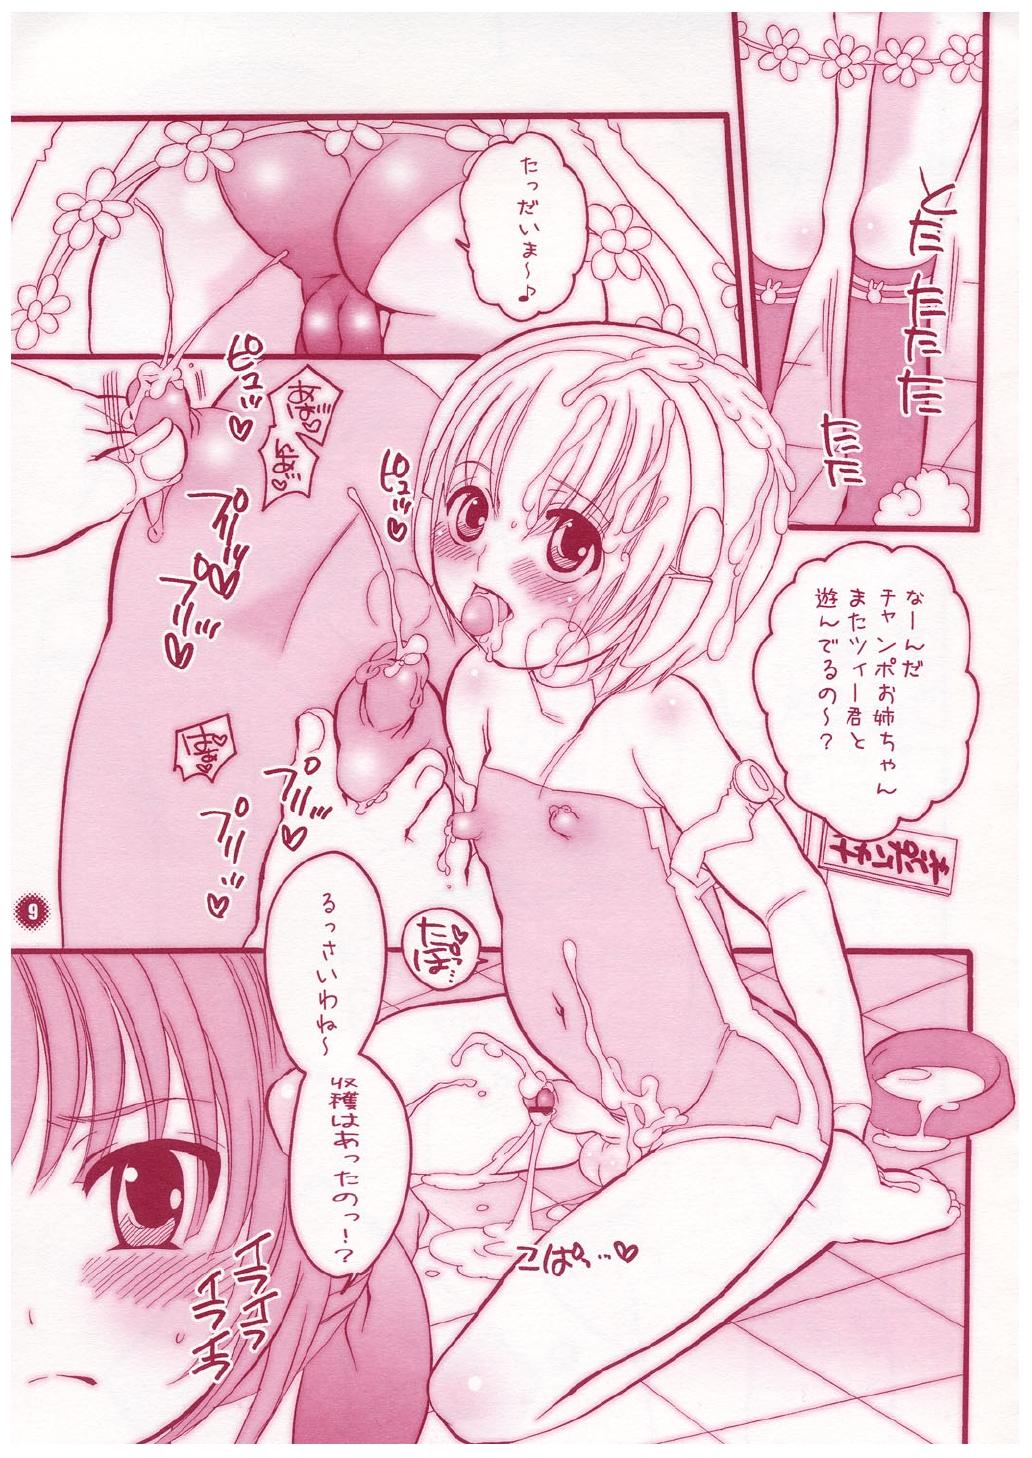 Anal Play Ronde of SS - Senko no ronde Atm - Page 9